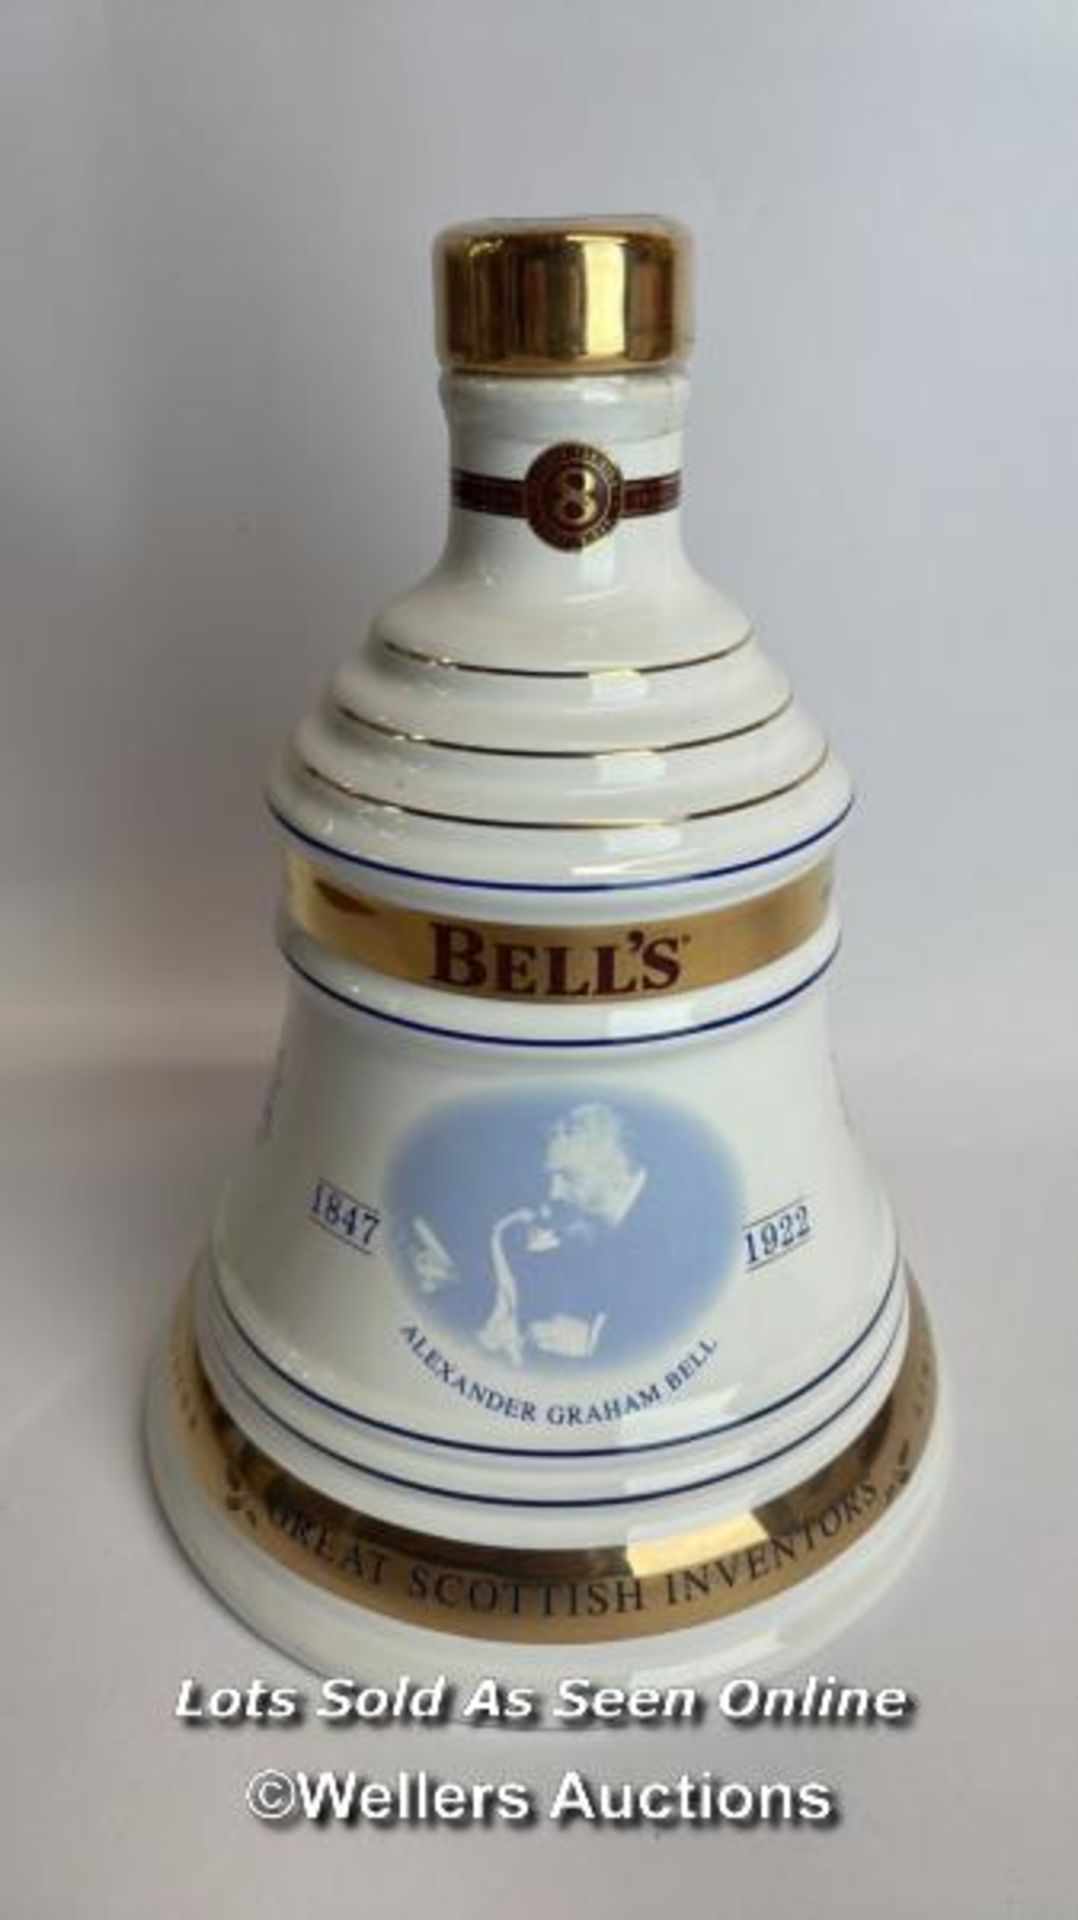 Bell's 2001 Old Scotch Whisky Limited Edition Christmas Decanter, Aged 8 Years, Brand New and Boxed, - Image 3 of 10